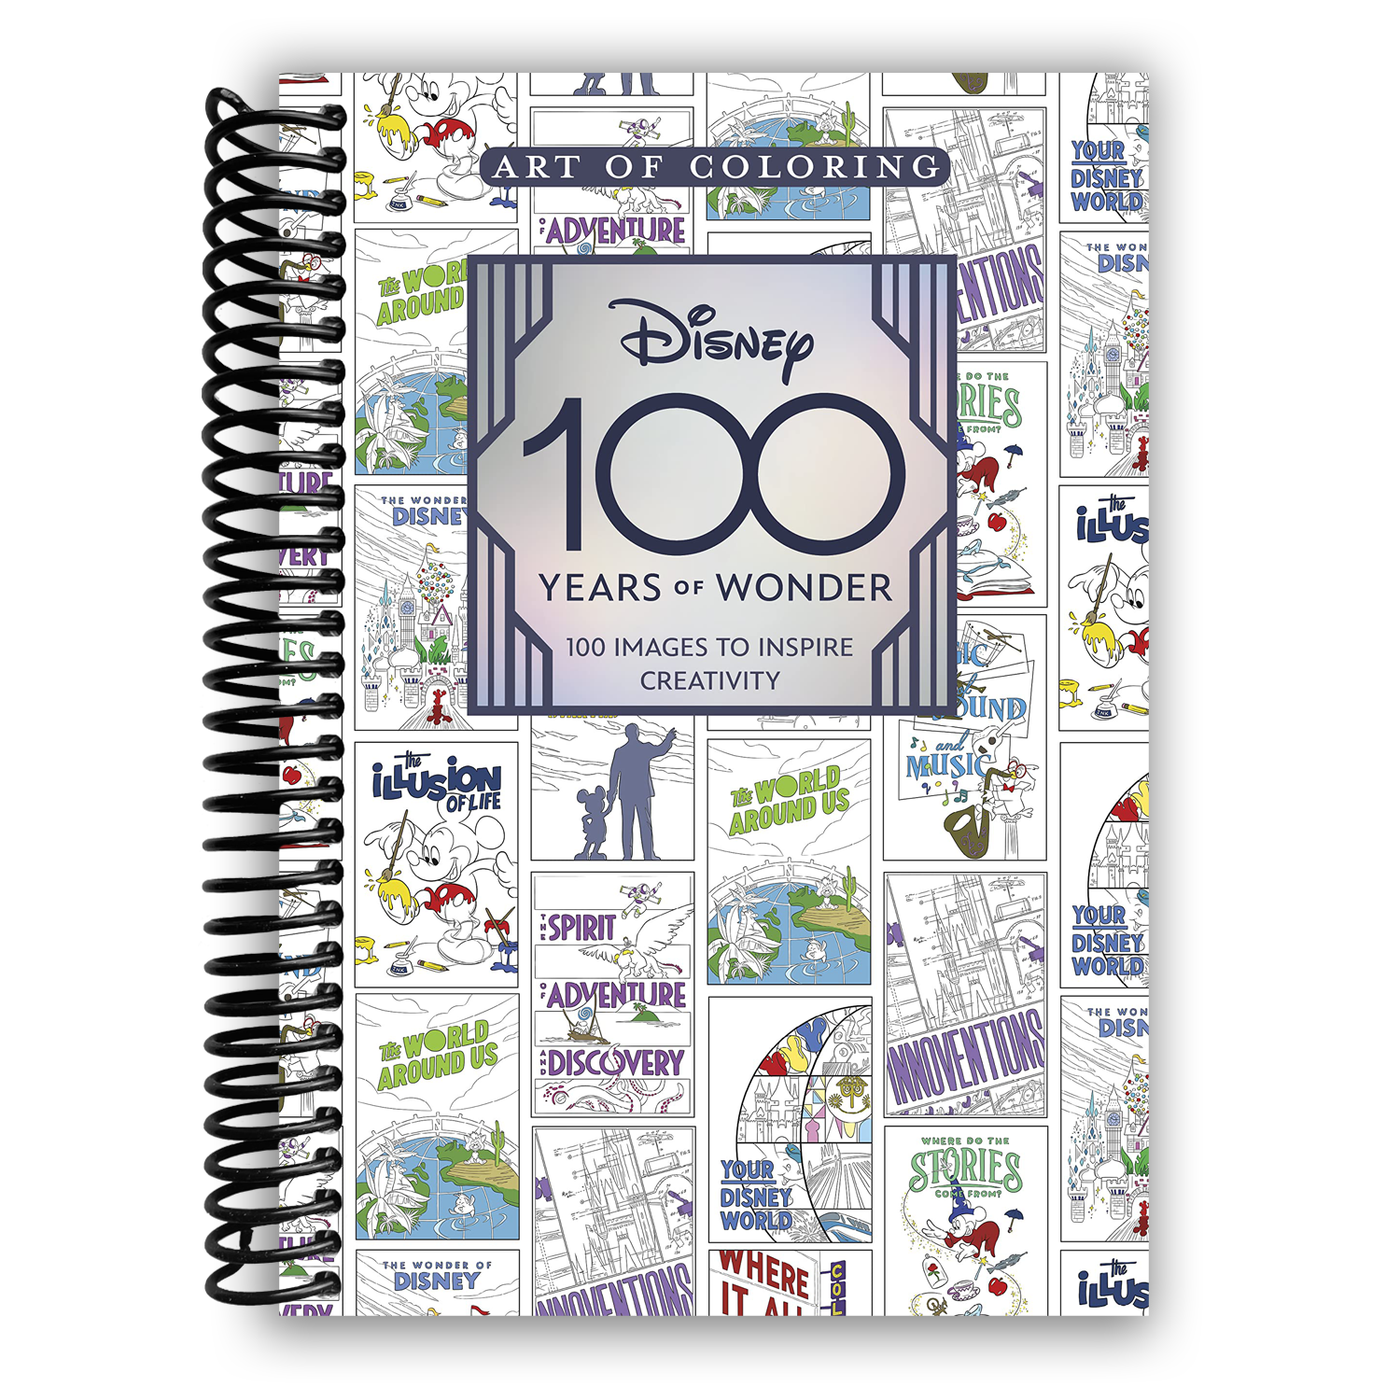 Art of Coloring: Disney 100 Years of Wonder: 100 Images to Inspire Creativity (Spiral-bound)